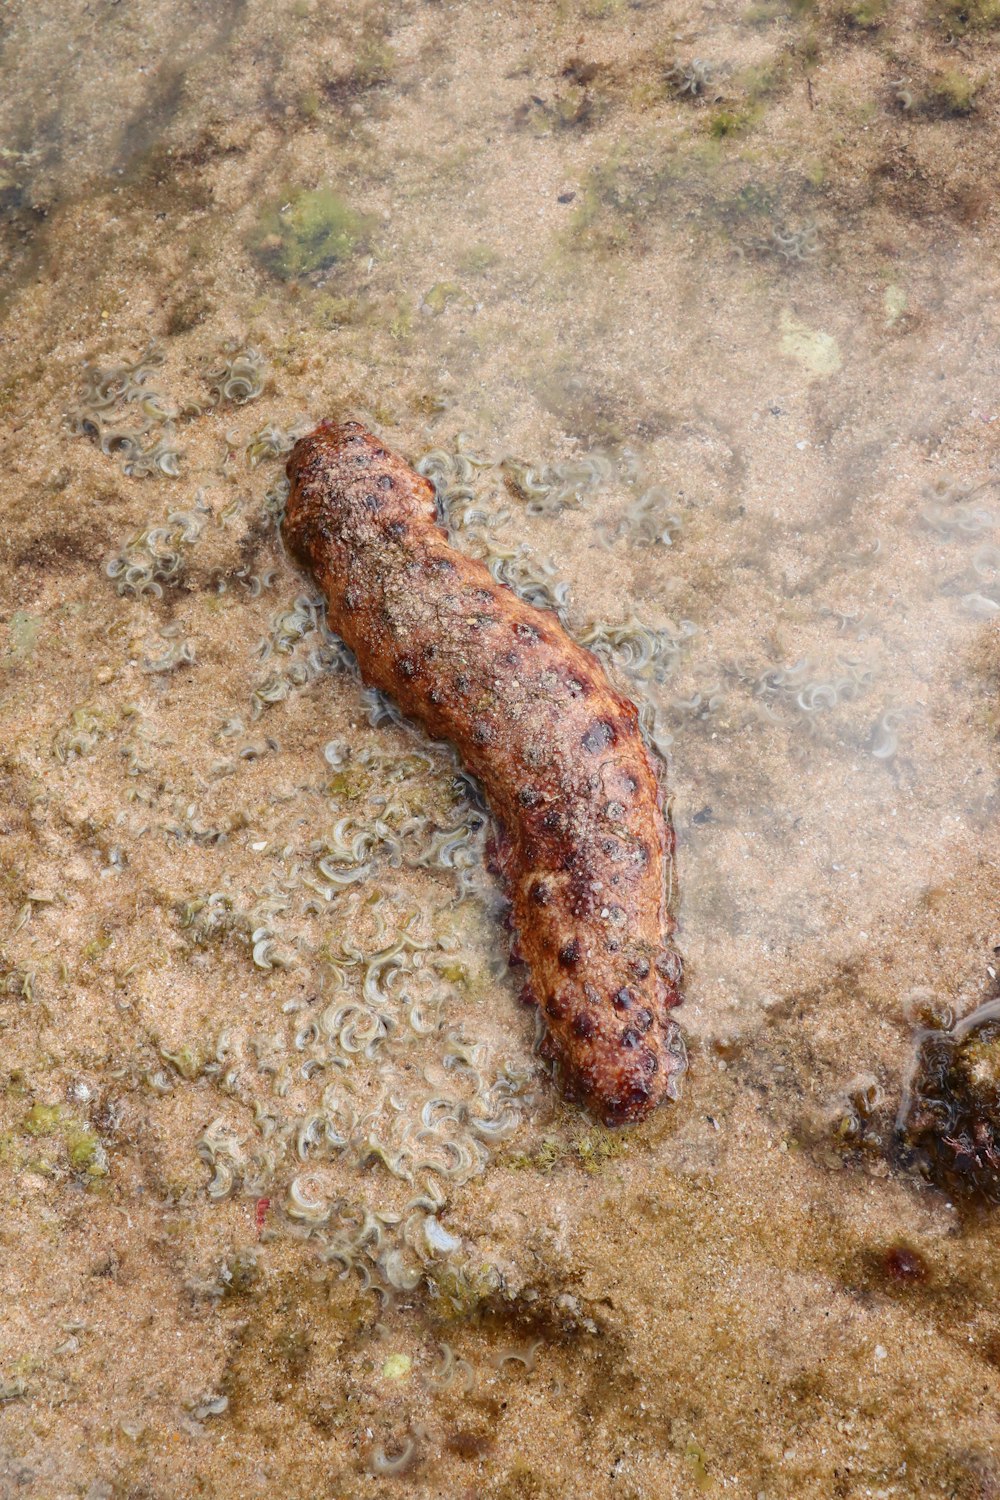 brown and black worm on brown sand